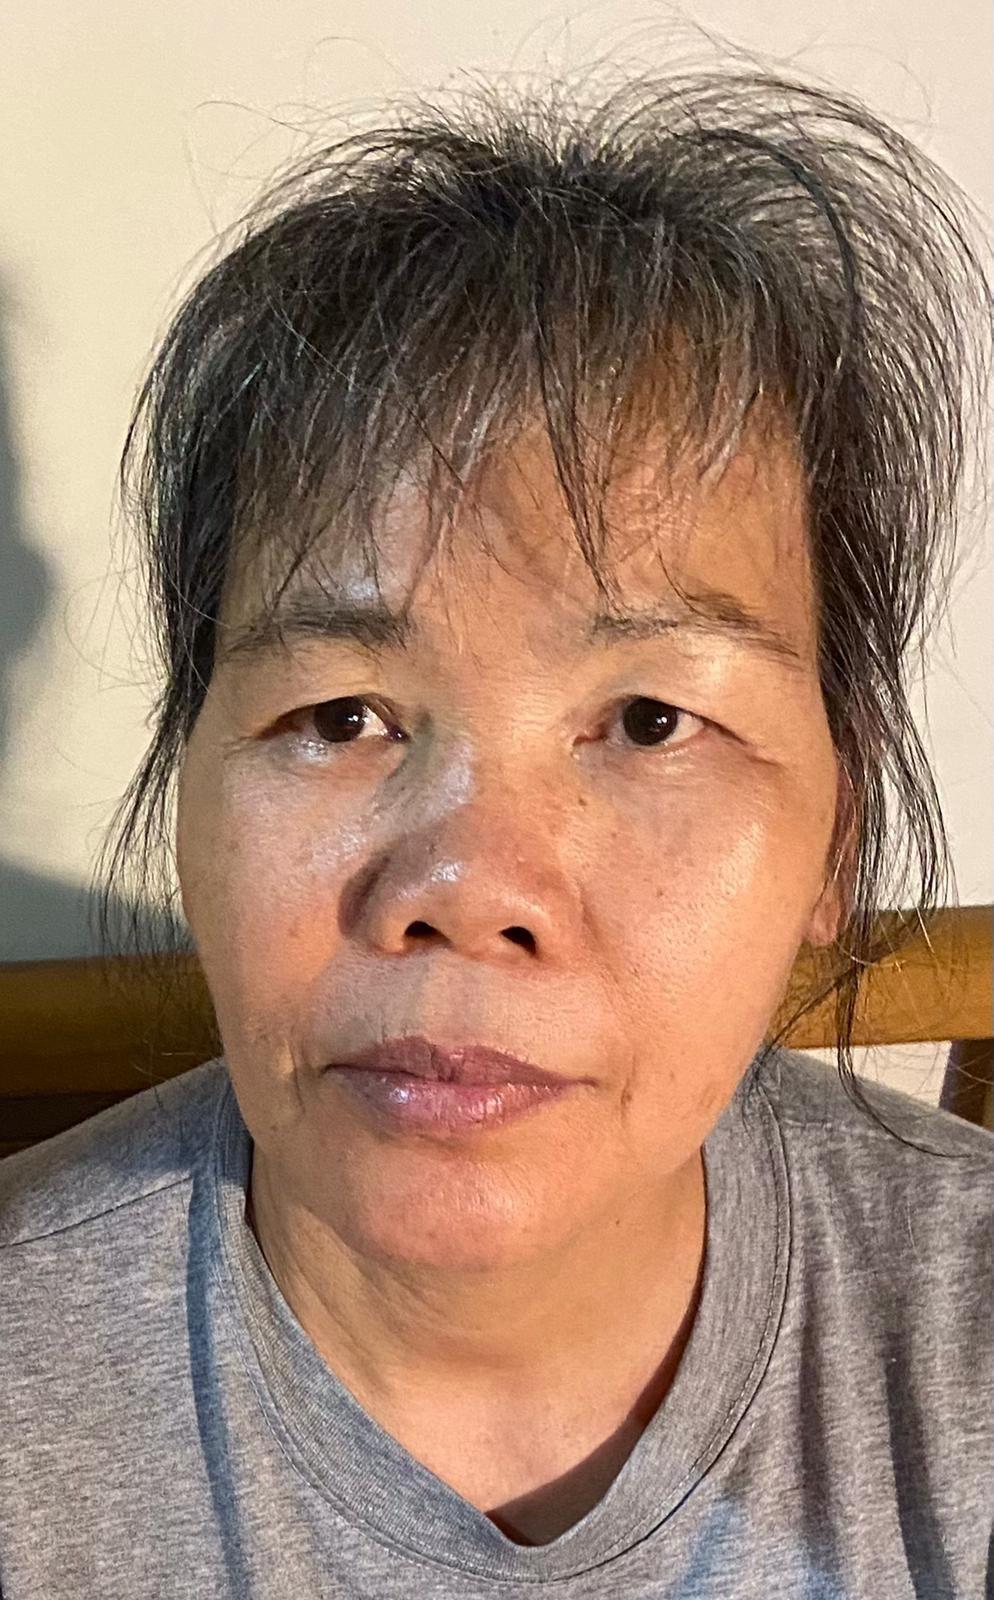 Chan Sau-fa, aged 59, is about 1.64 metres tall, 63 kilograms in weight and of medium build. She has a long face with yellow complexion and black-grey hair in shoulder length.